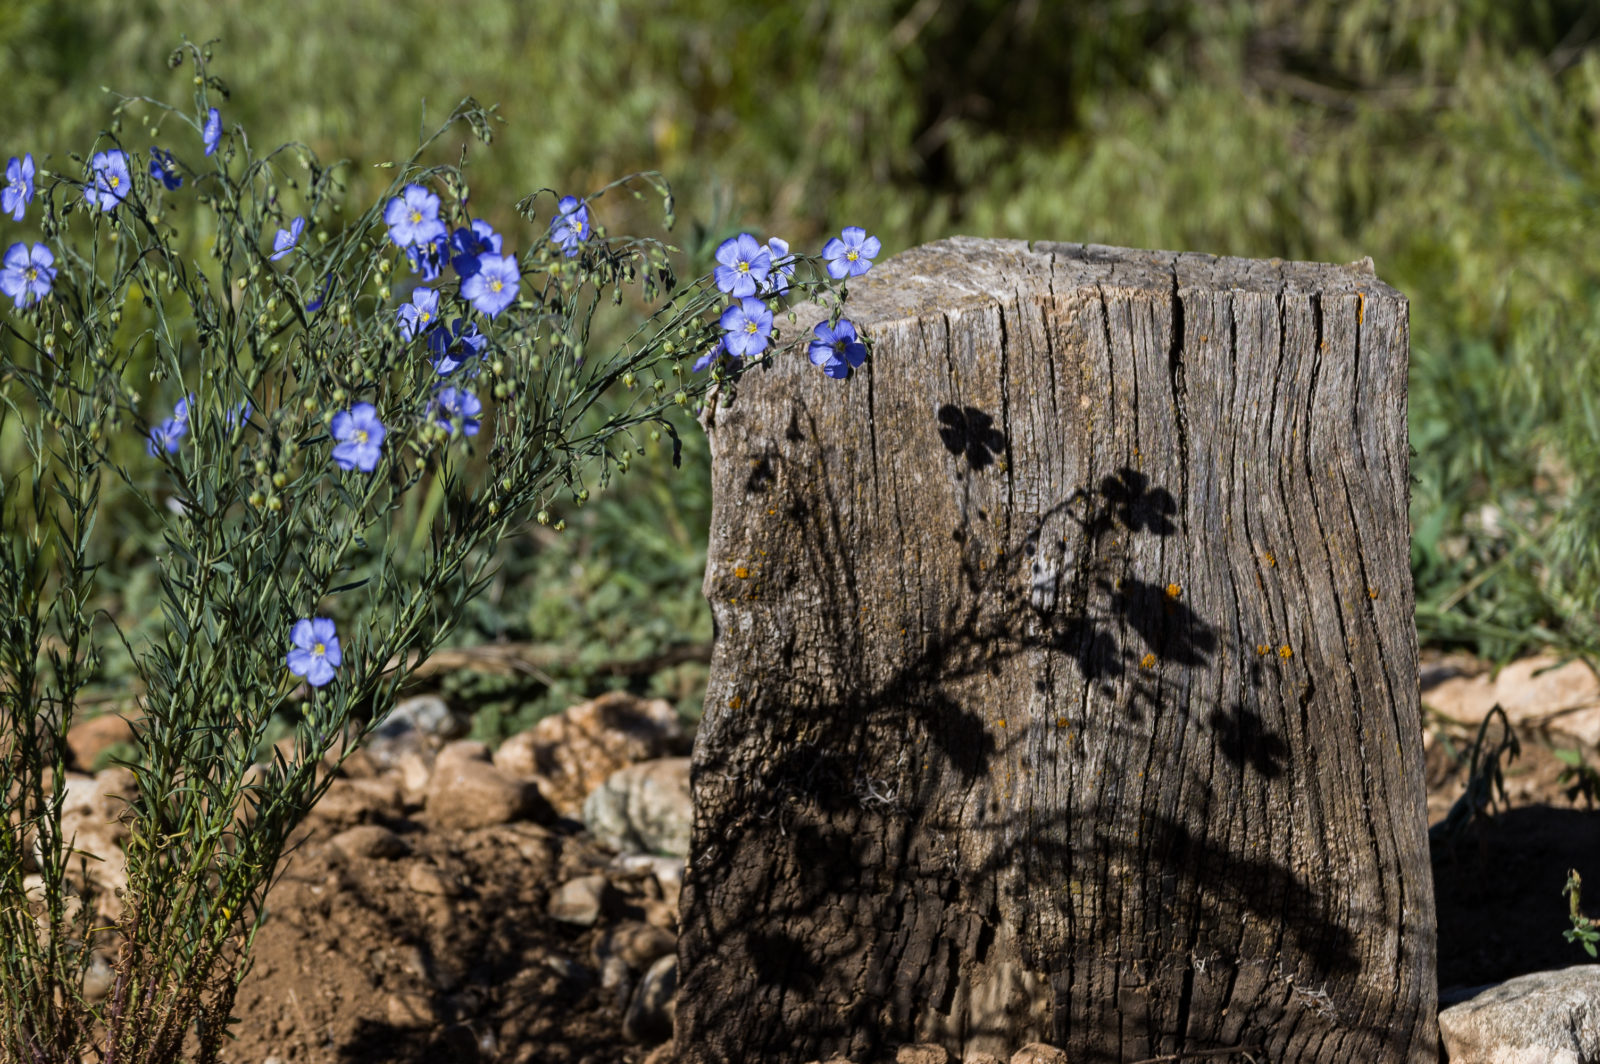 Blue flowers scramble over a strategically placed chunk of wood in this landscape design